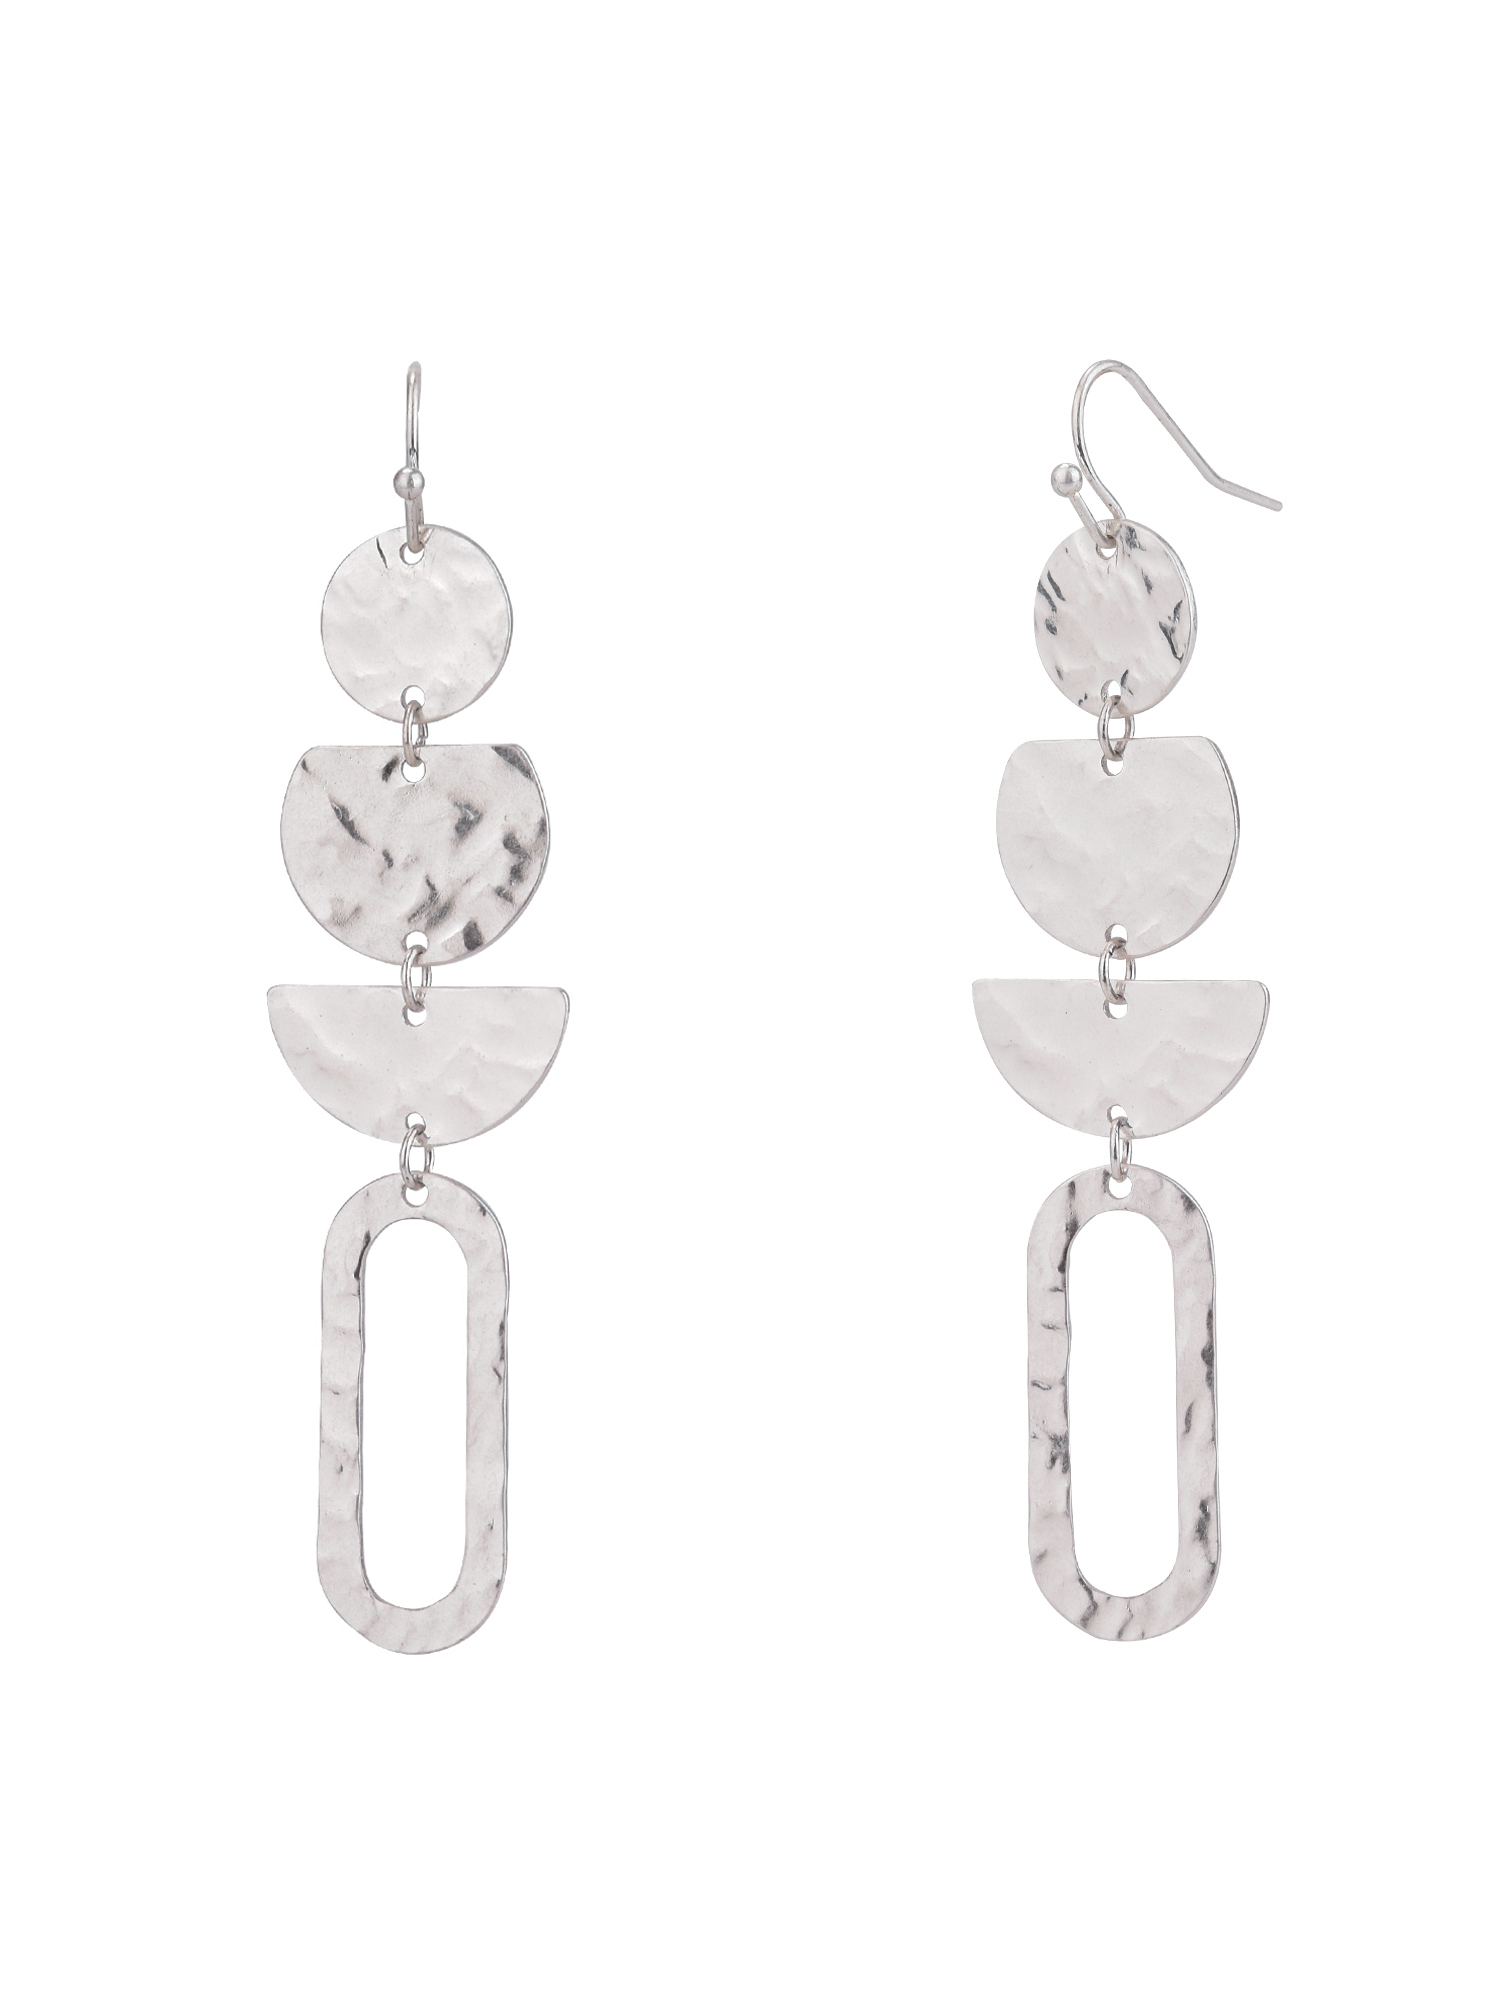 The Pioneer Woman - Women's Jewelry, Soft Silver-tone and Soft Gold-tone Metal Drop Duo Earring Set - image 3 of 6